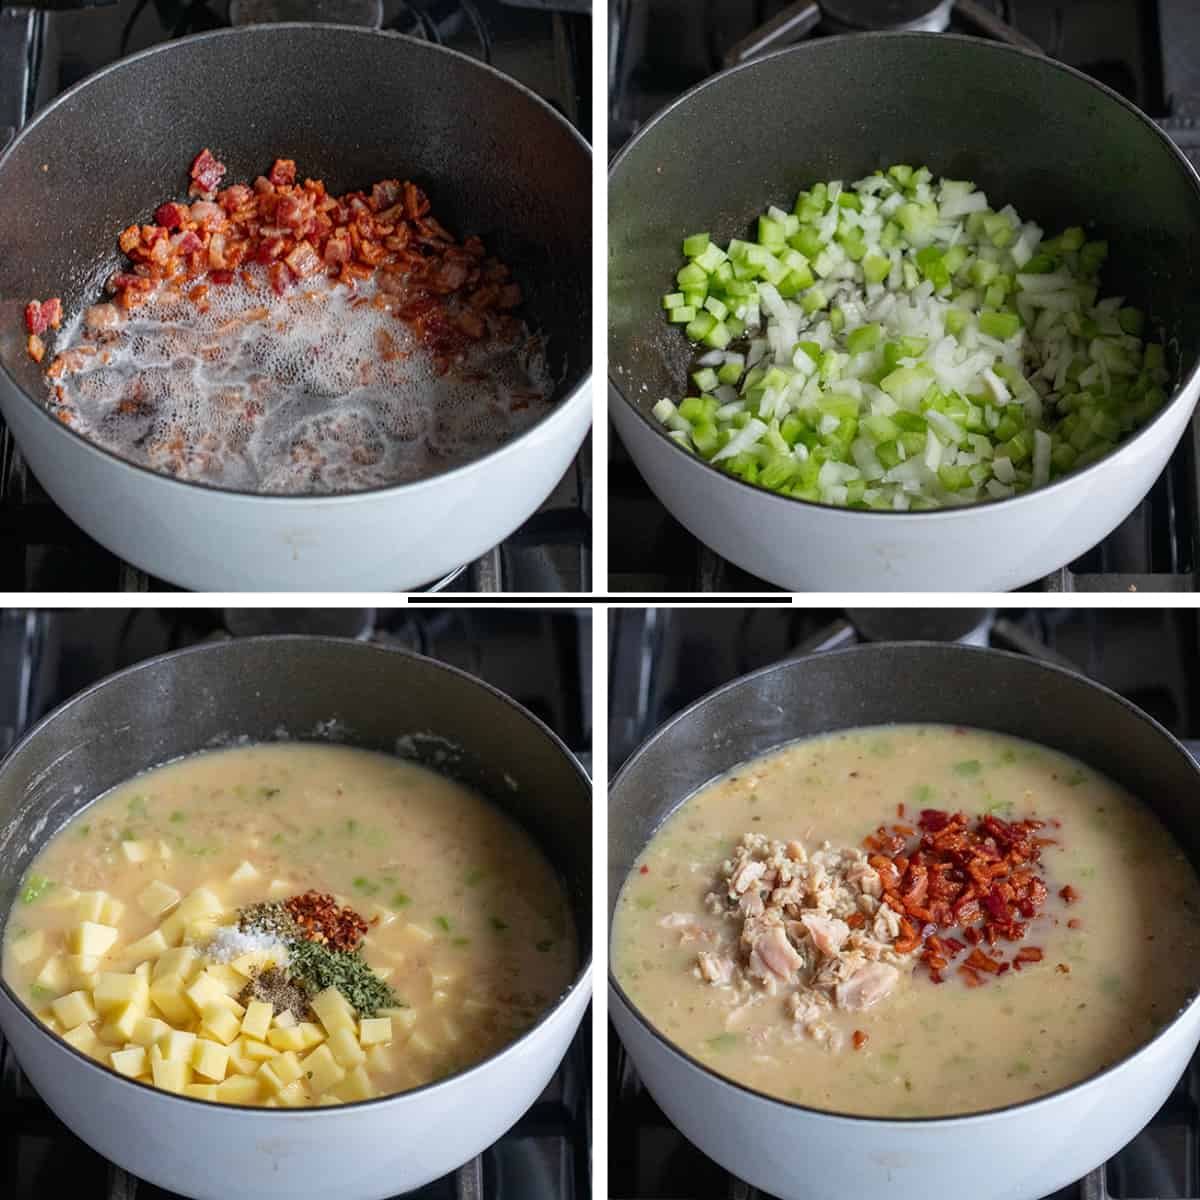 Steps for making New England Clam Chowder in a pot on the stove.